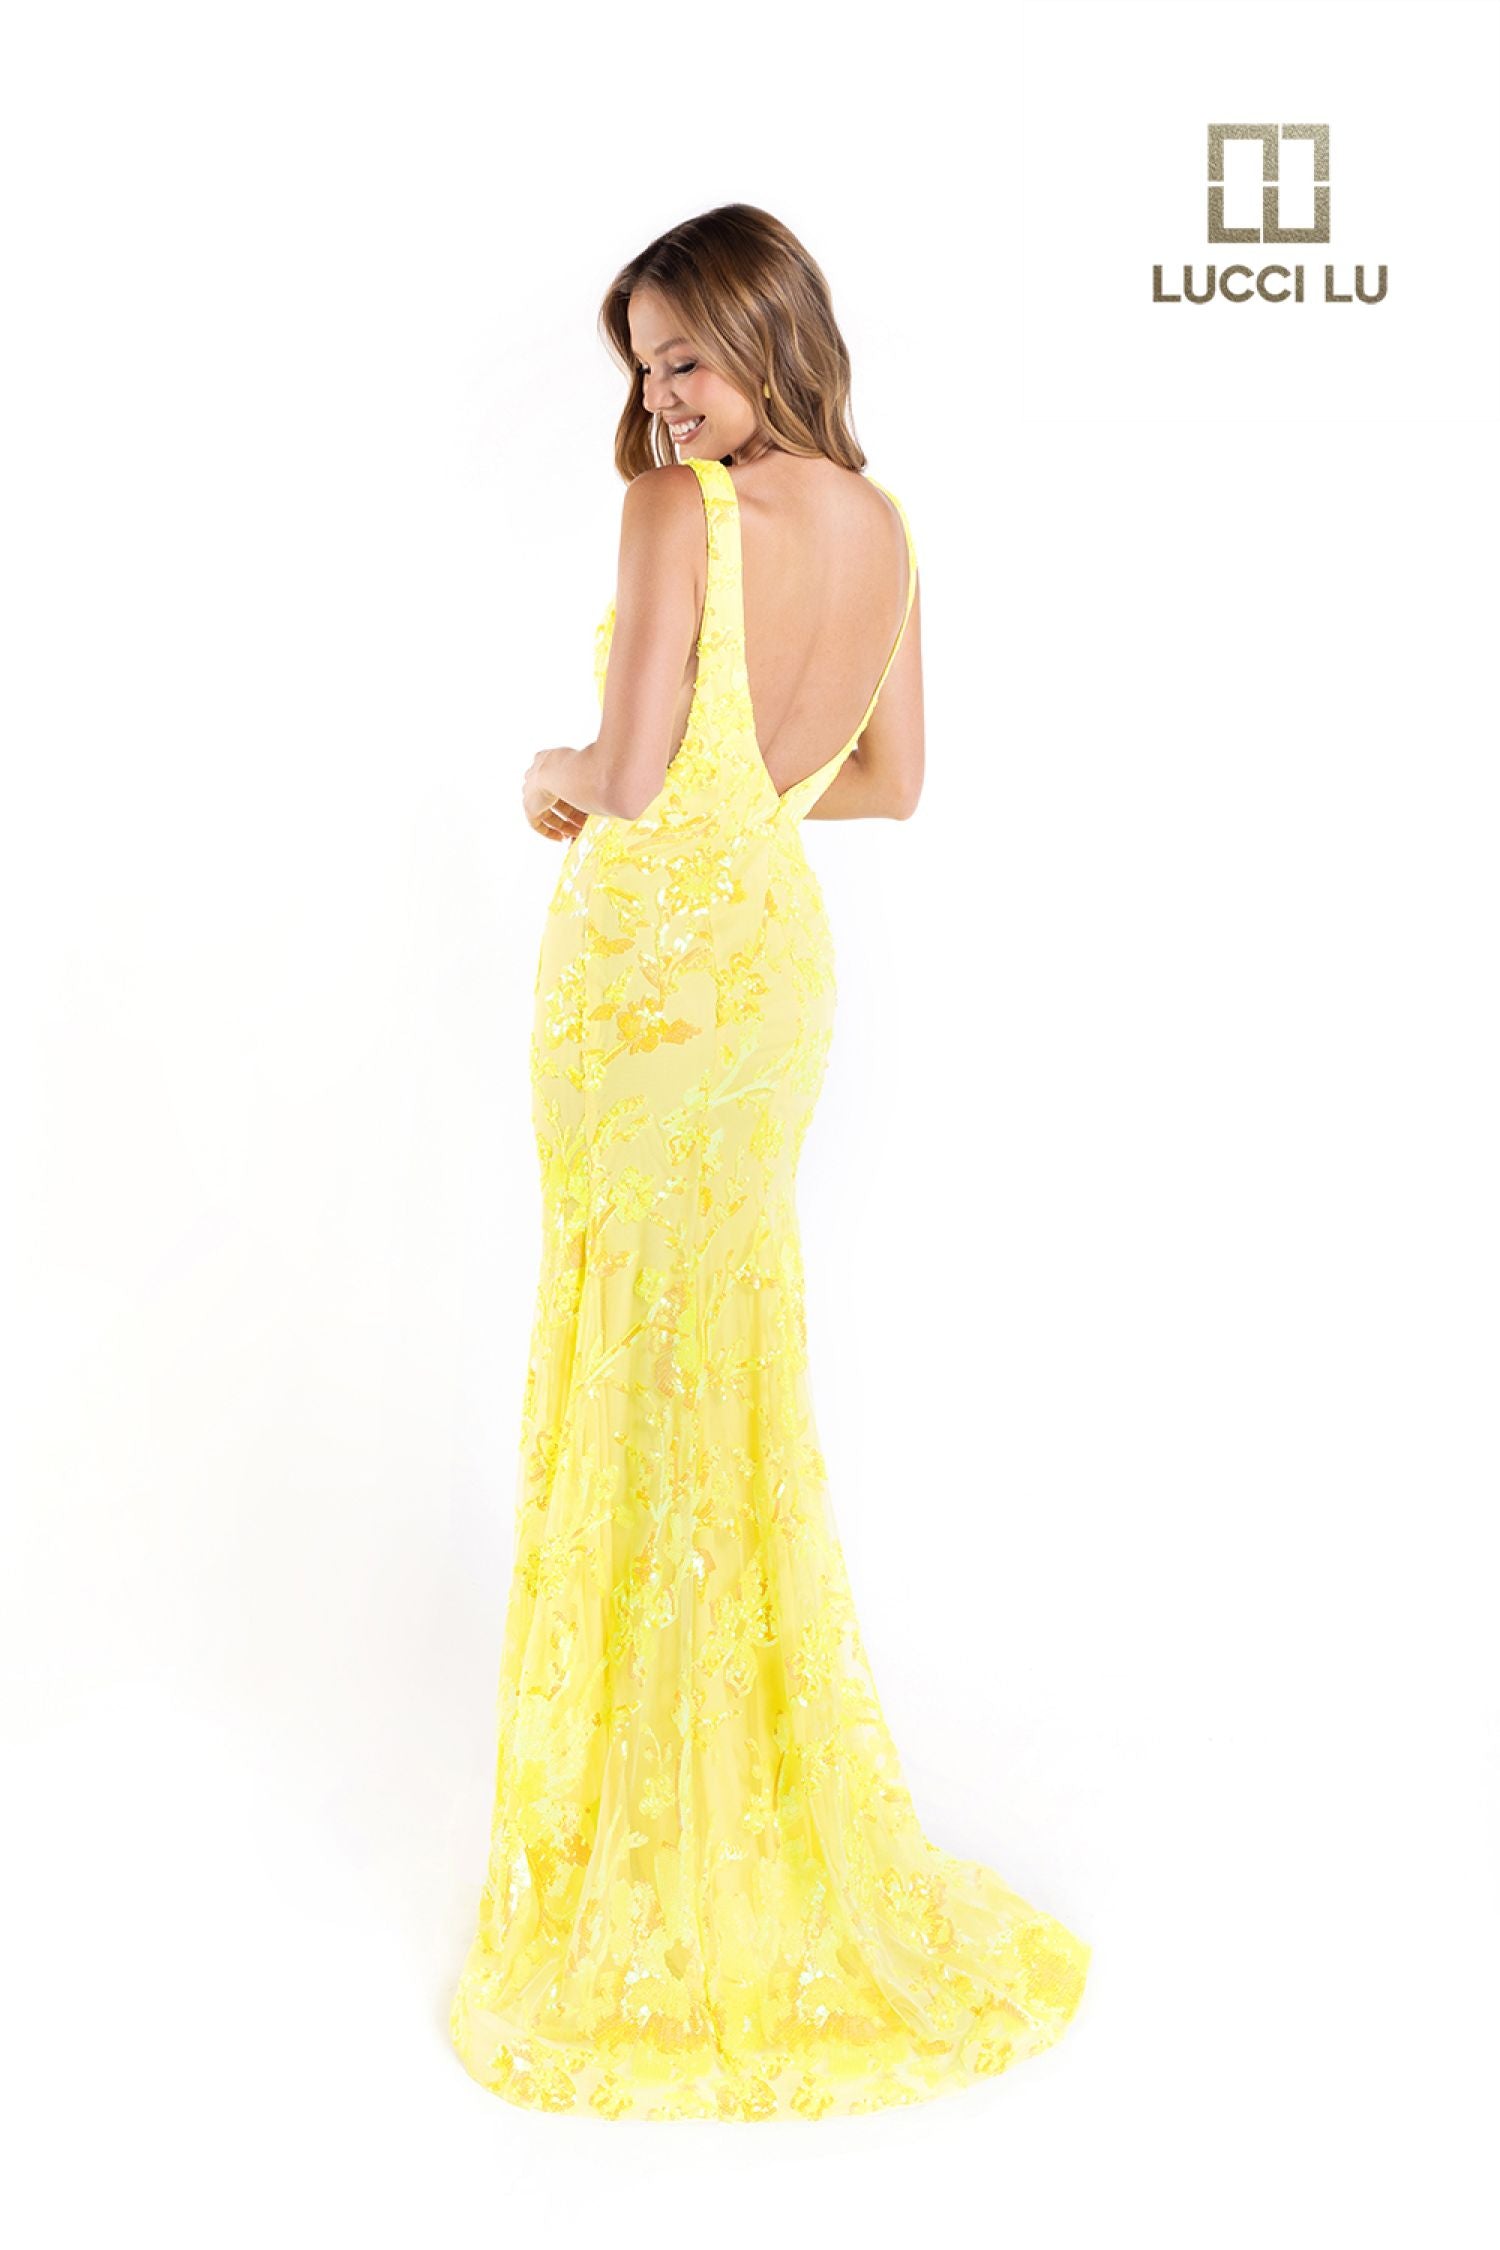 Lucci Lu 1230 Long Fitted Sequin Neon Prom Dress V Neck Formal Pageant Gown Backless  Sizes: 00-24  Colors: Neon Orange, Neon Pink, Neon Yellow